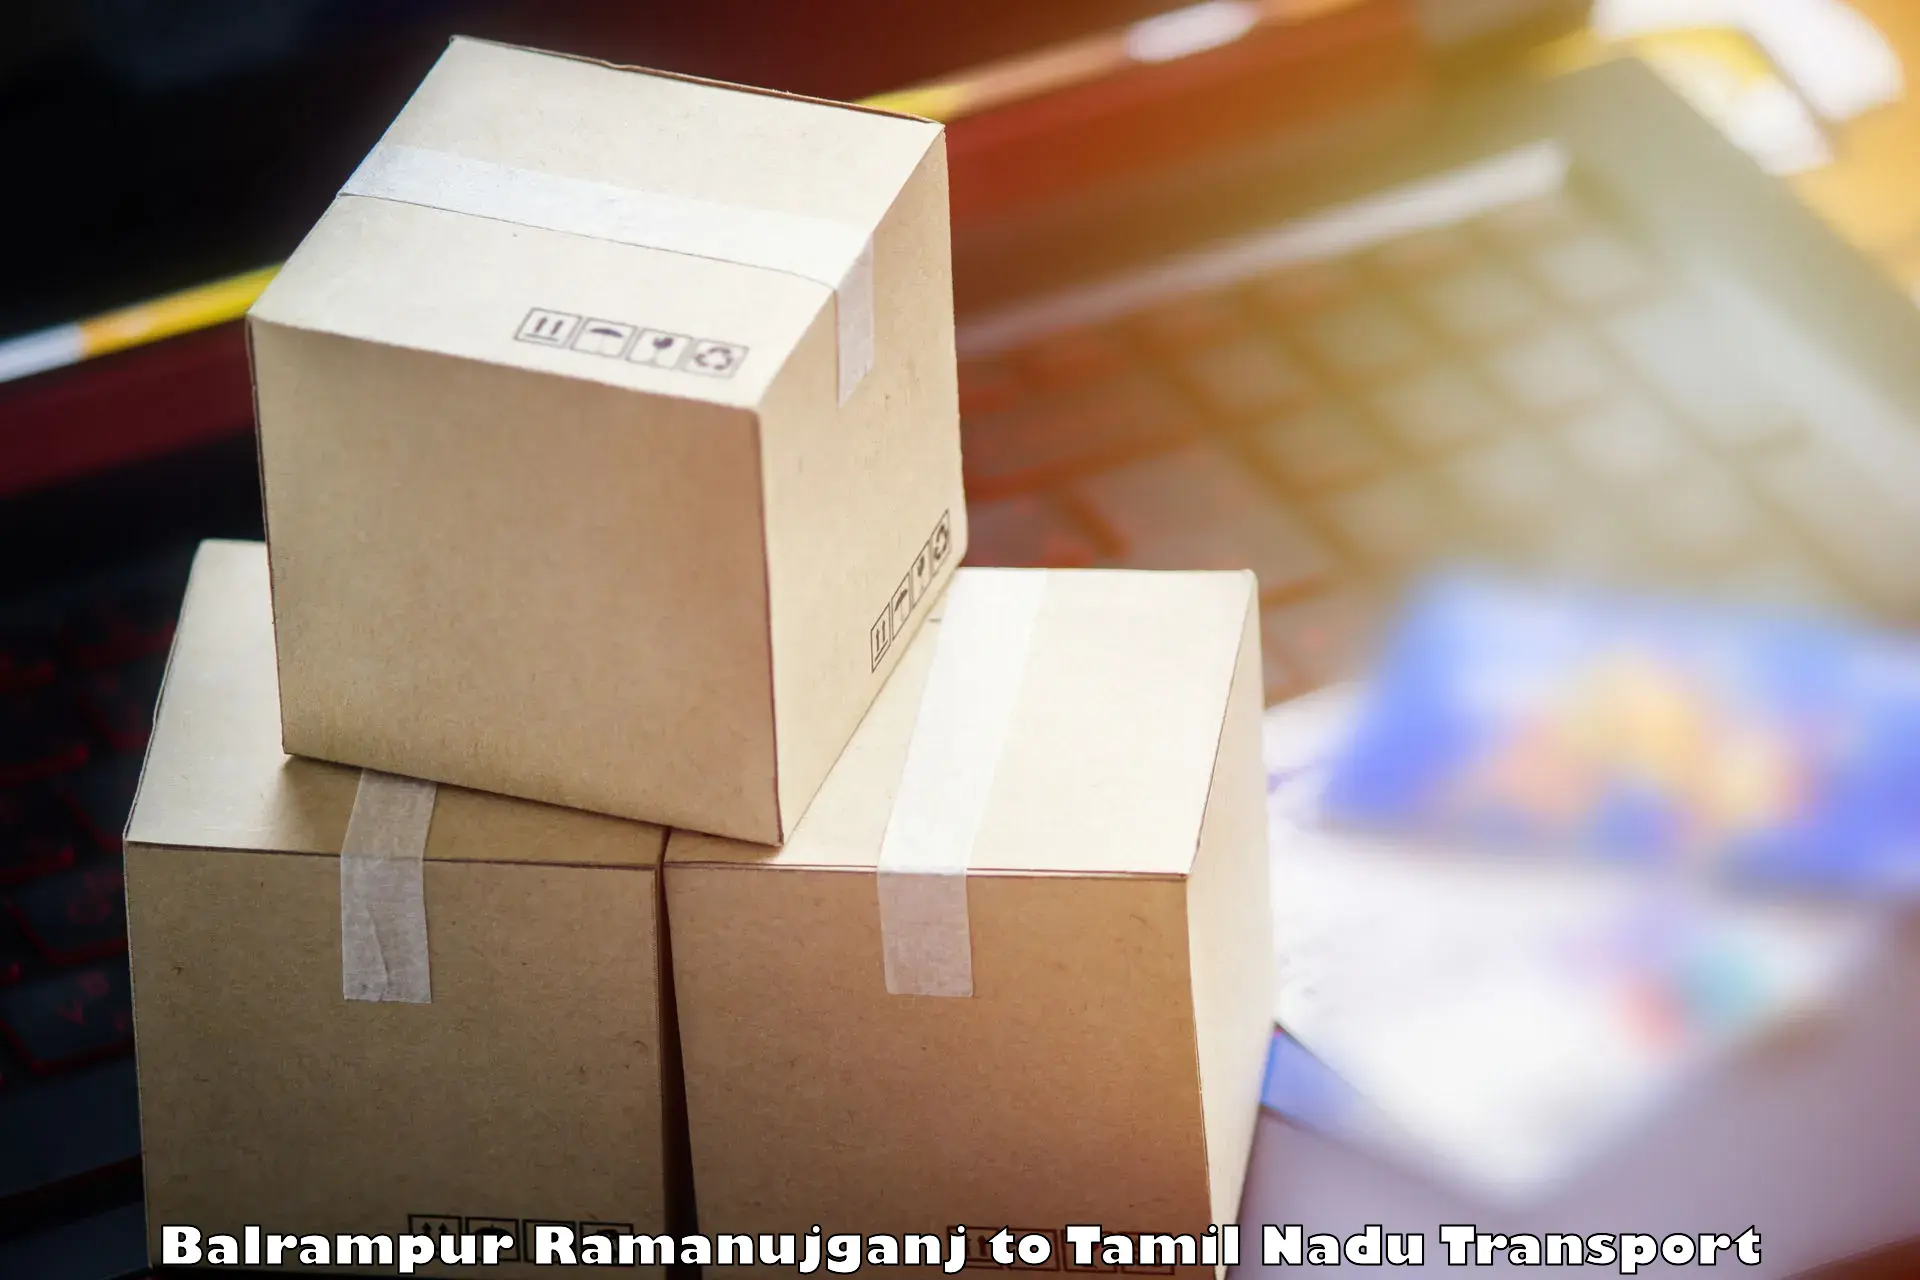 Air freight transport services Balrampur Ramanujganj to Vellore Institute of Technology